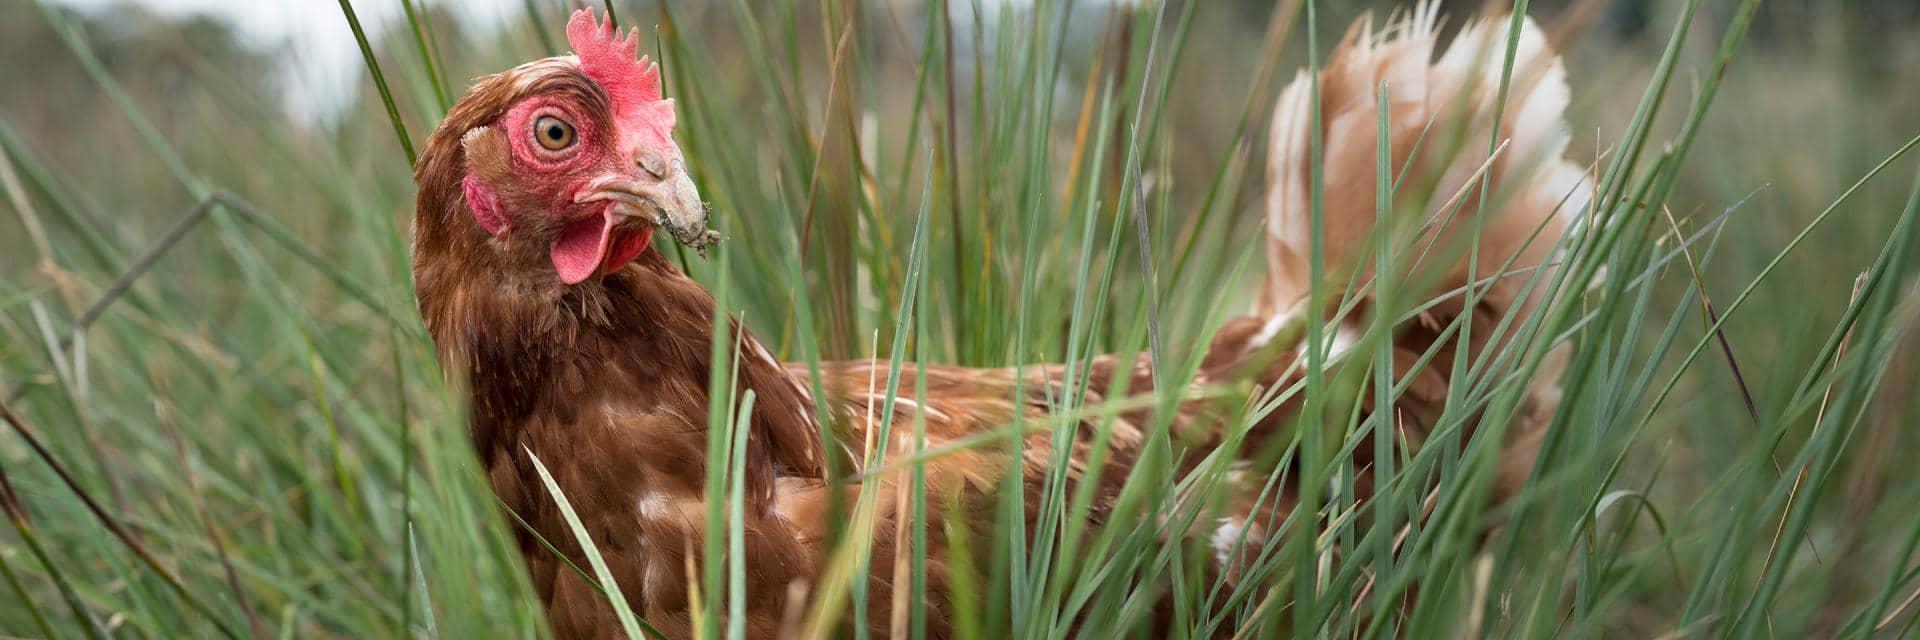 A lone chicken surrounded by grass in a field